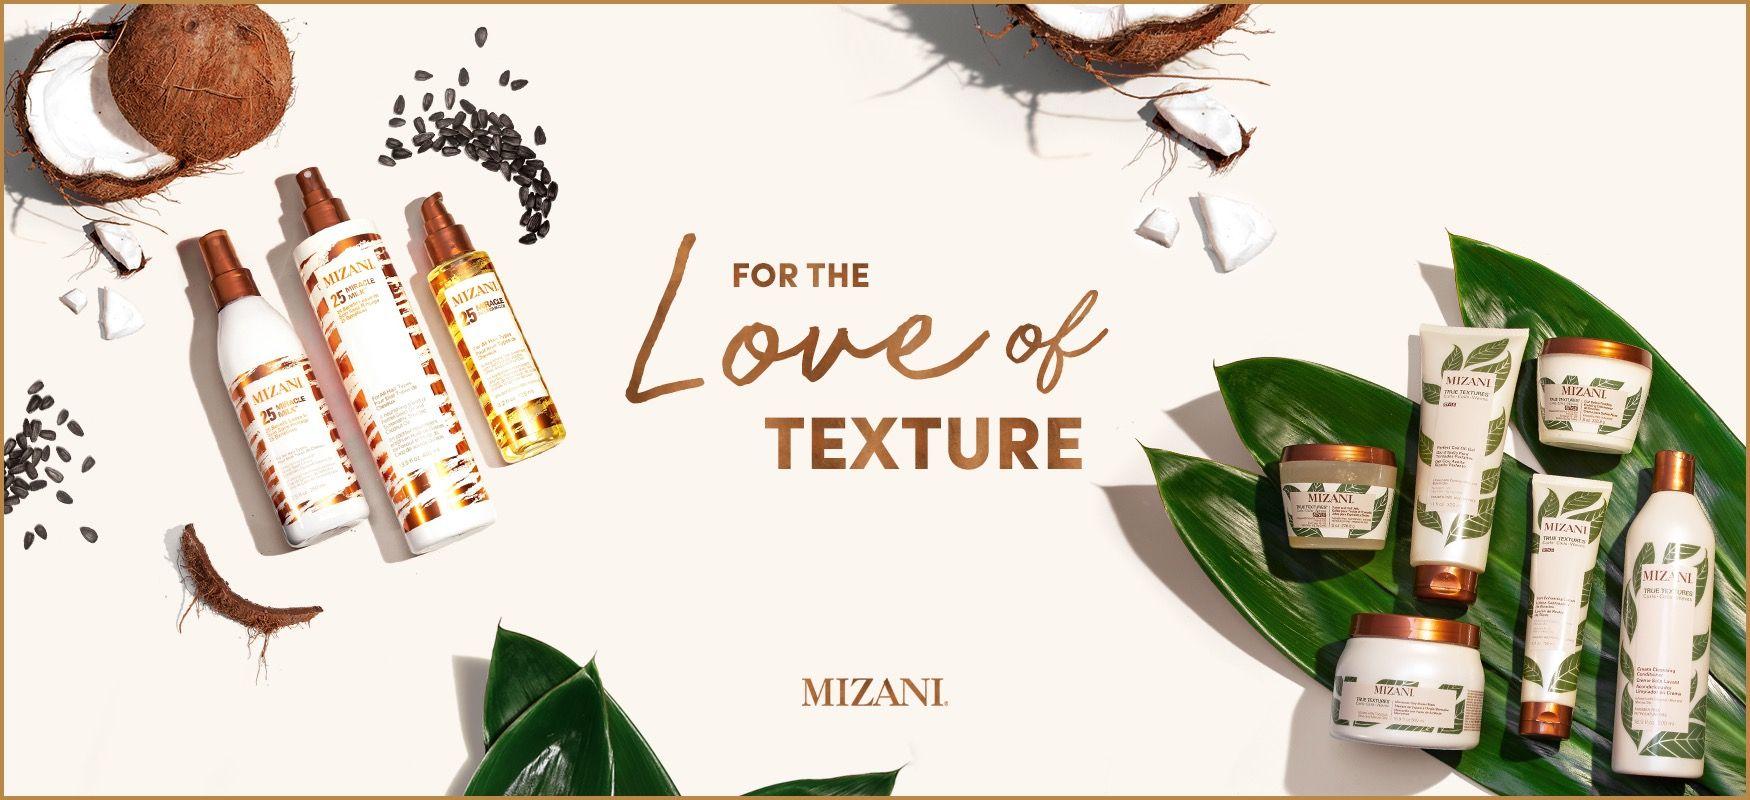 Mizani Logo - Professional Hair Care & Styling Products for All Hair Types